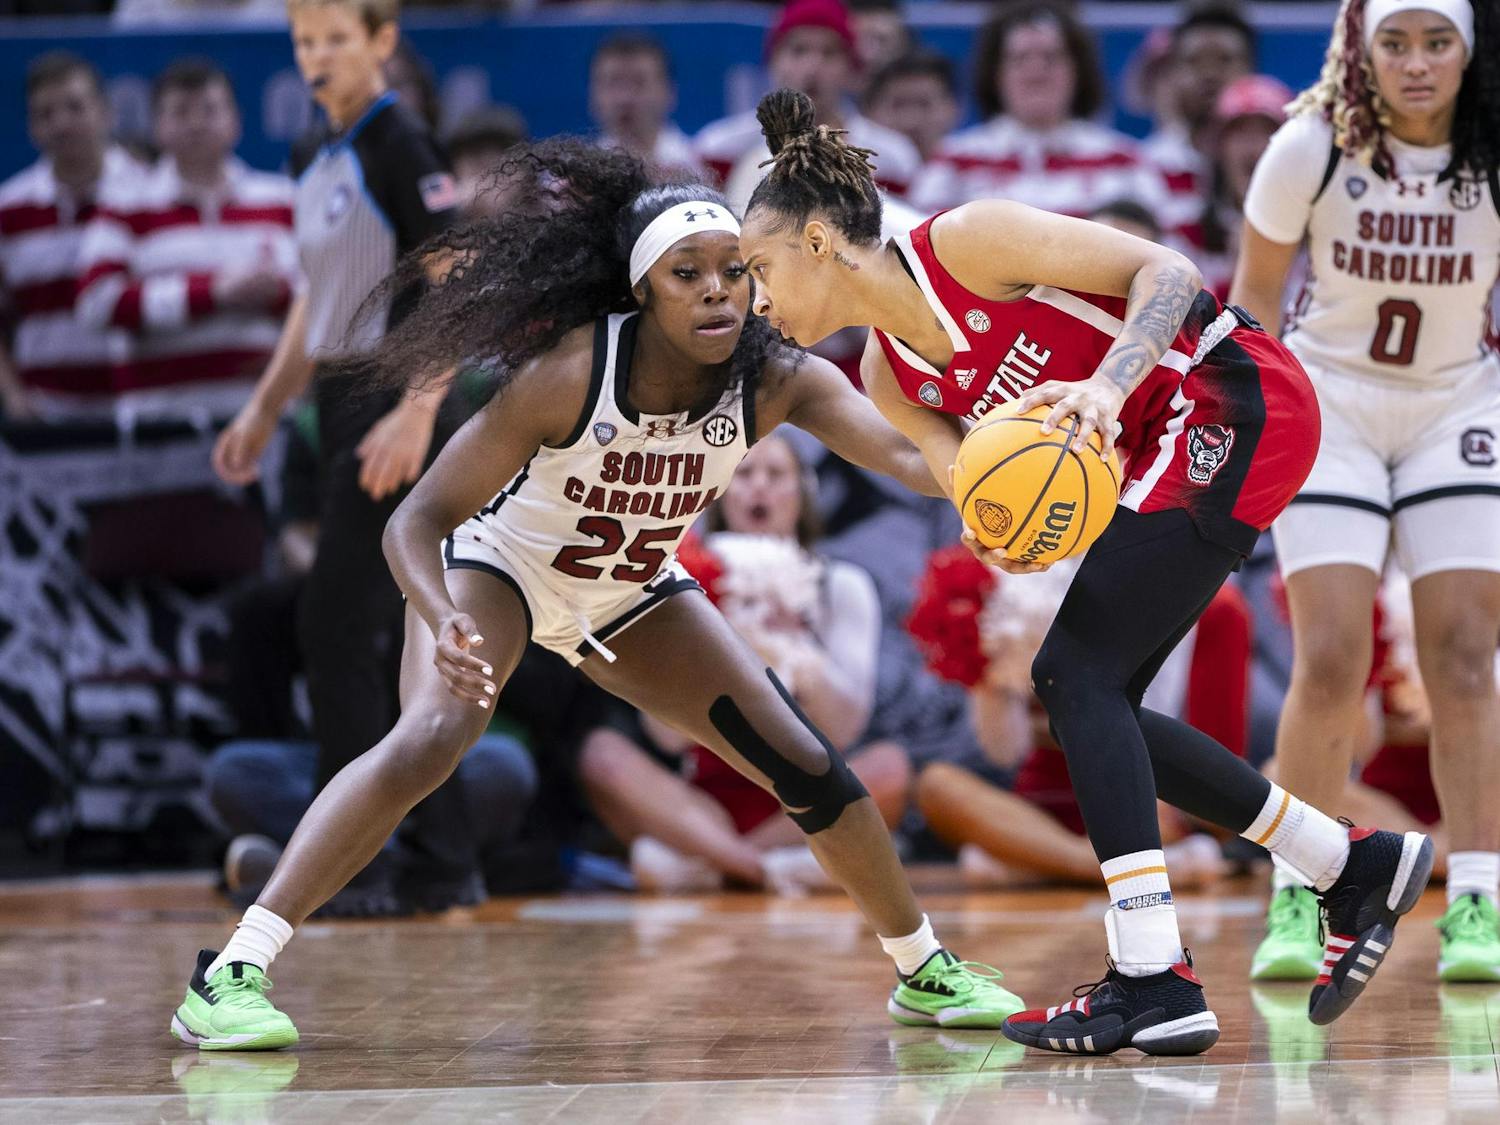 Sophomore guard Raven Johnson plays defense during the Gamecocks' matchup with the Wolf Pack. Johnson earned her 16th double digit game during the Gamecock victory.